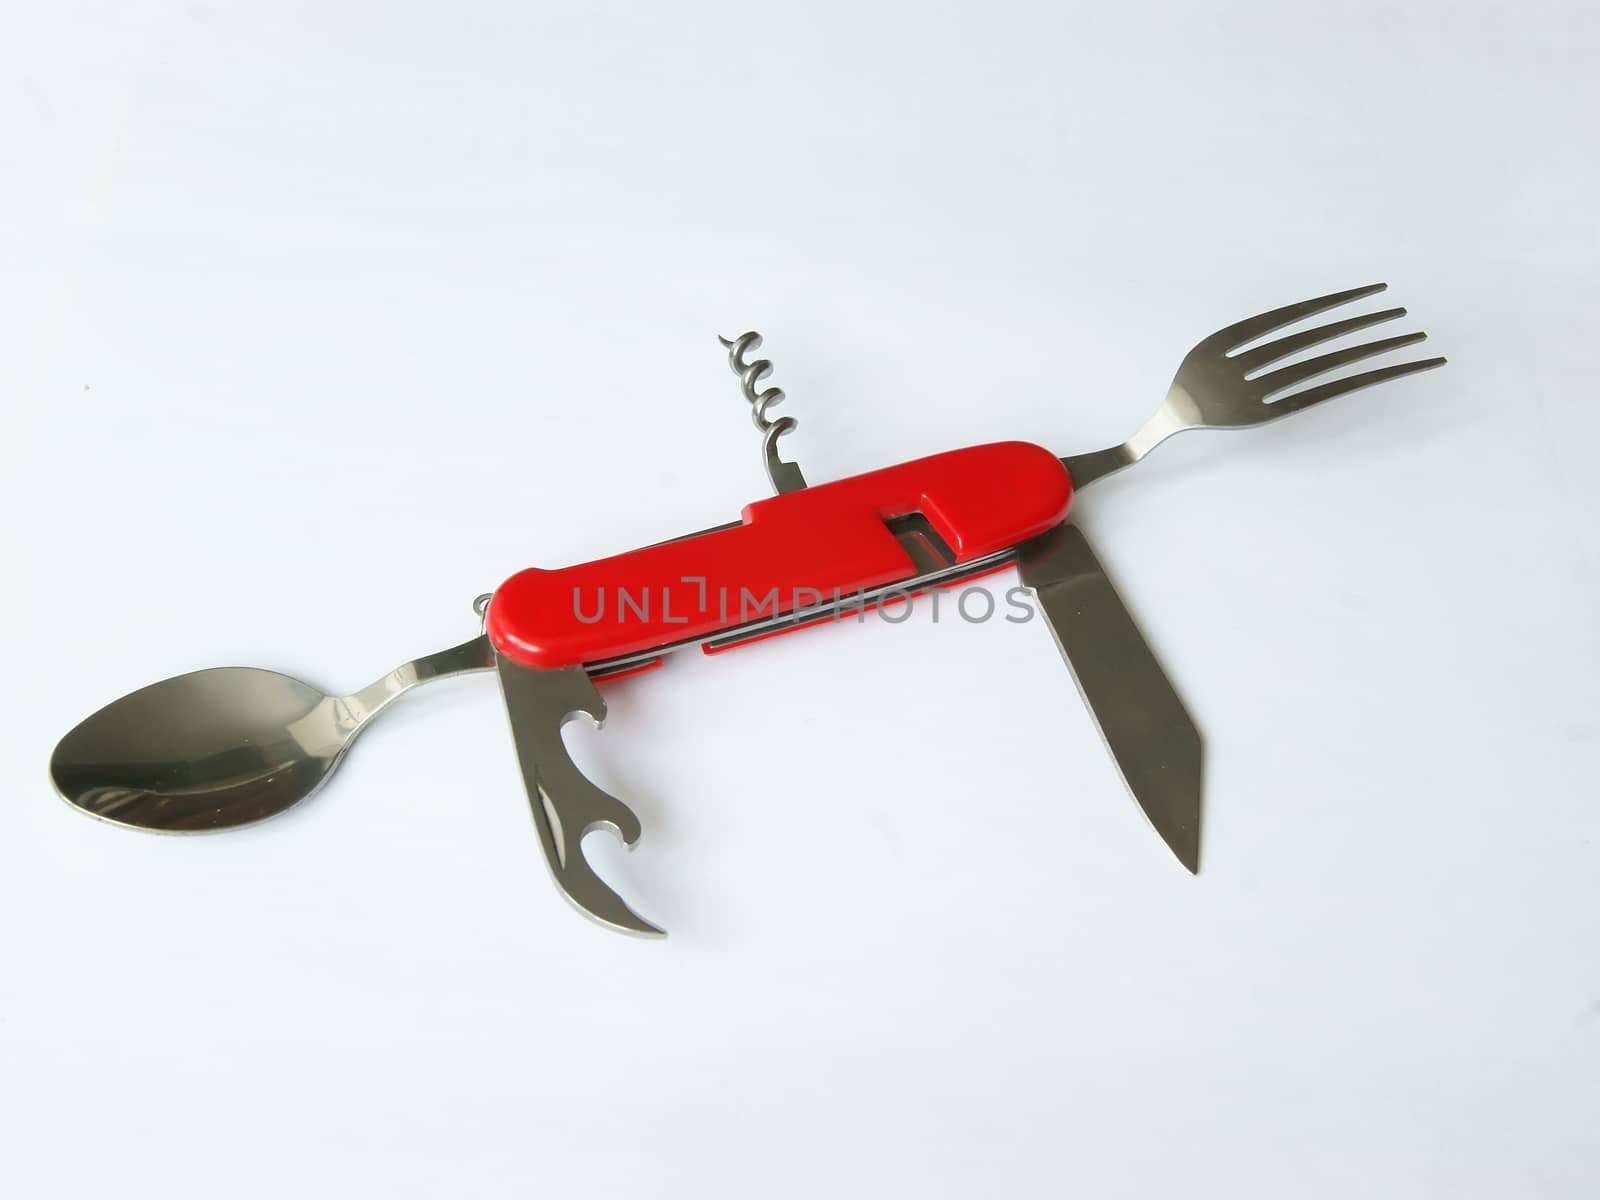 Foldable tourist knife, fork, spoon and corkscrew, a key for opening bottles and cans